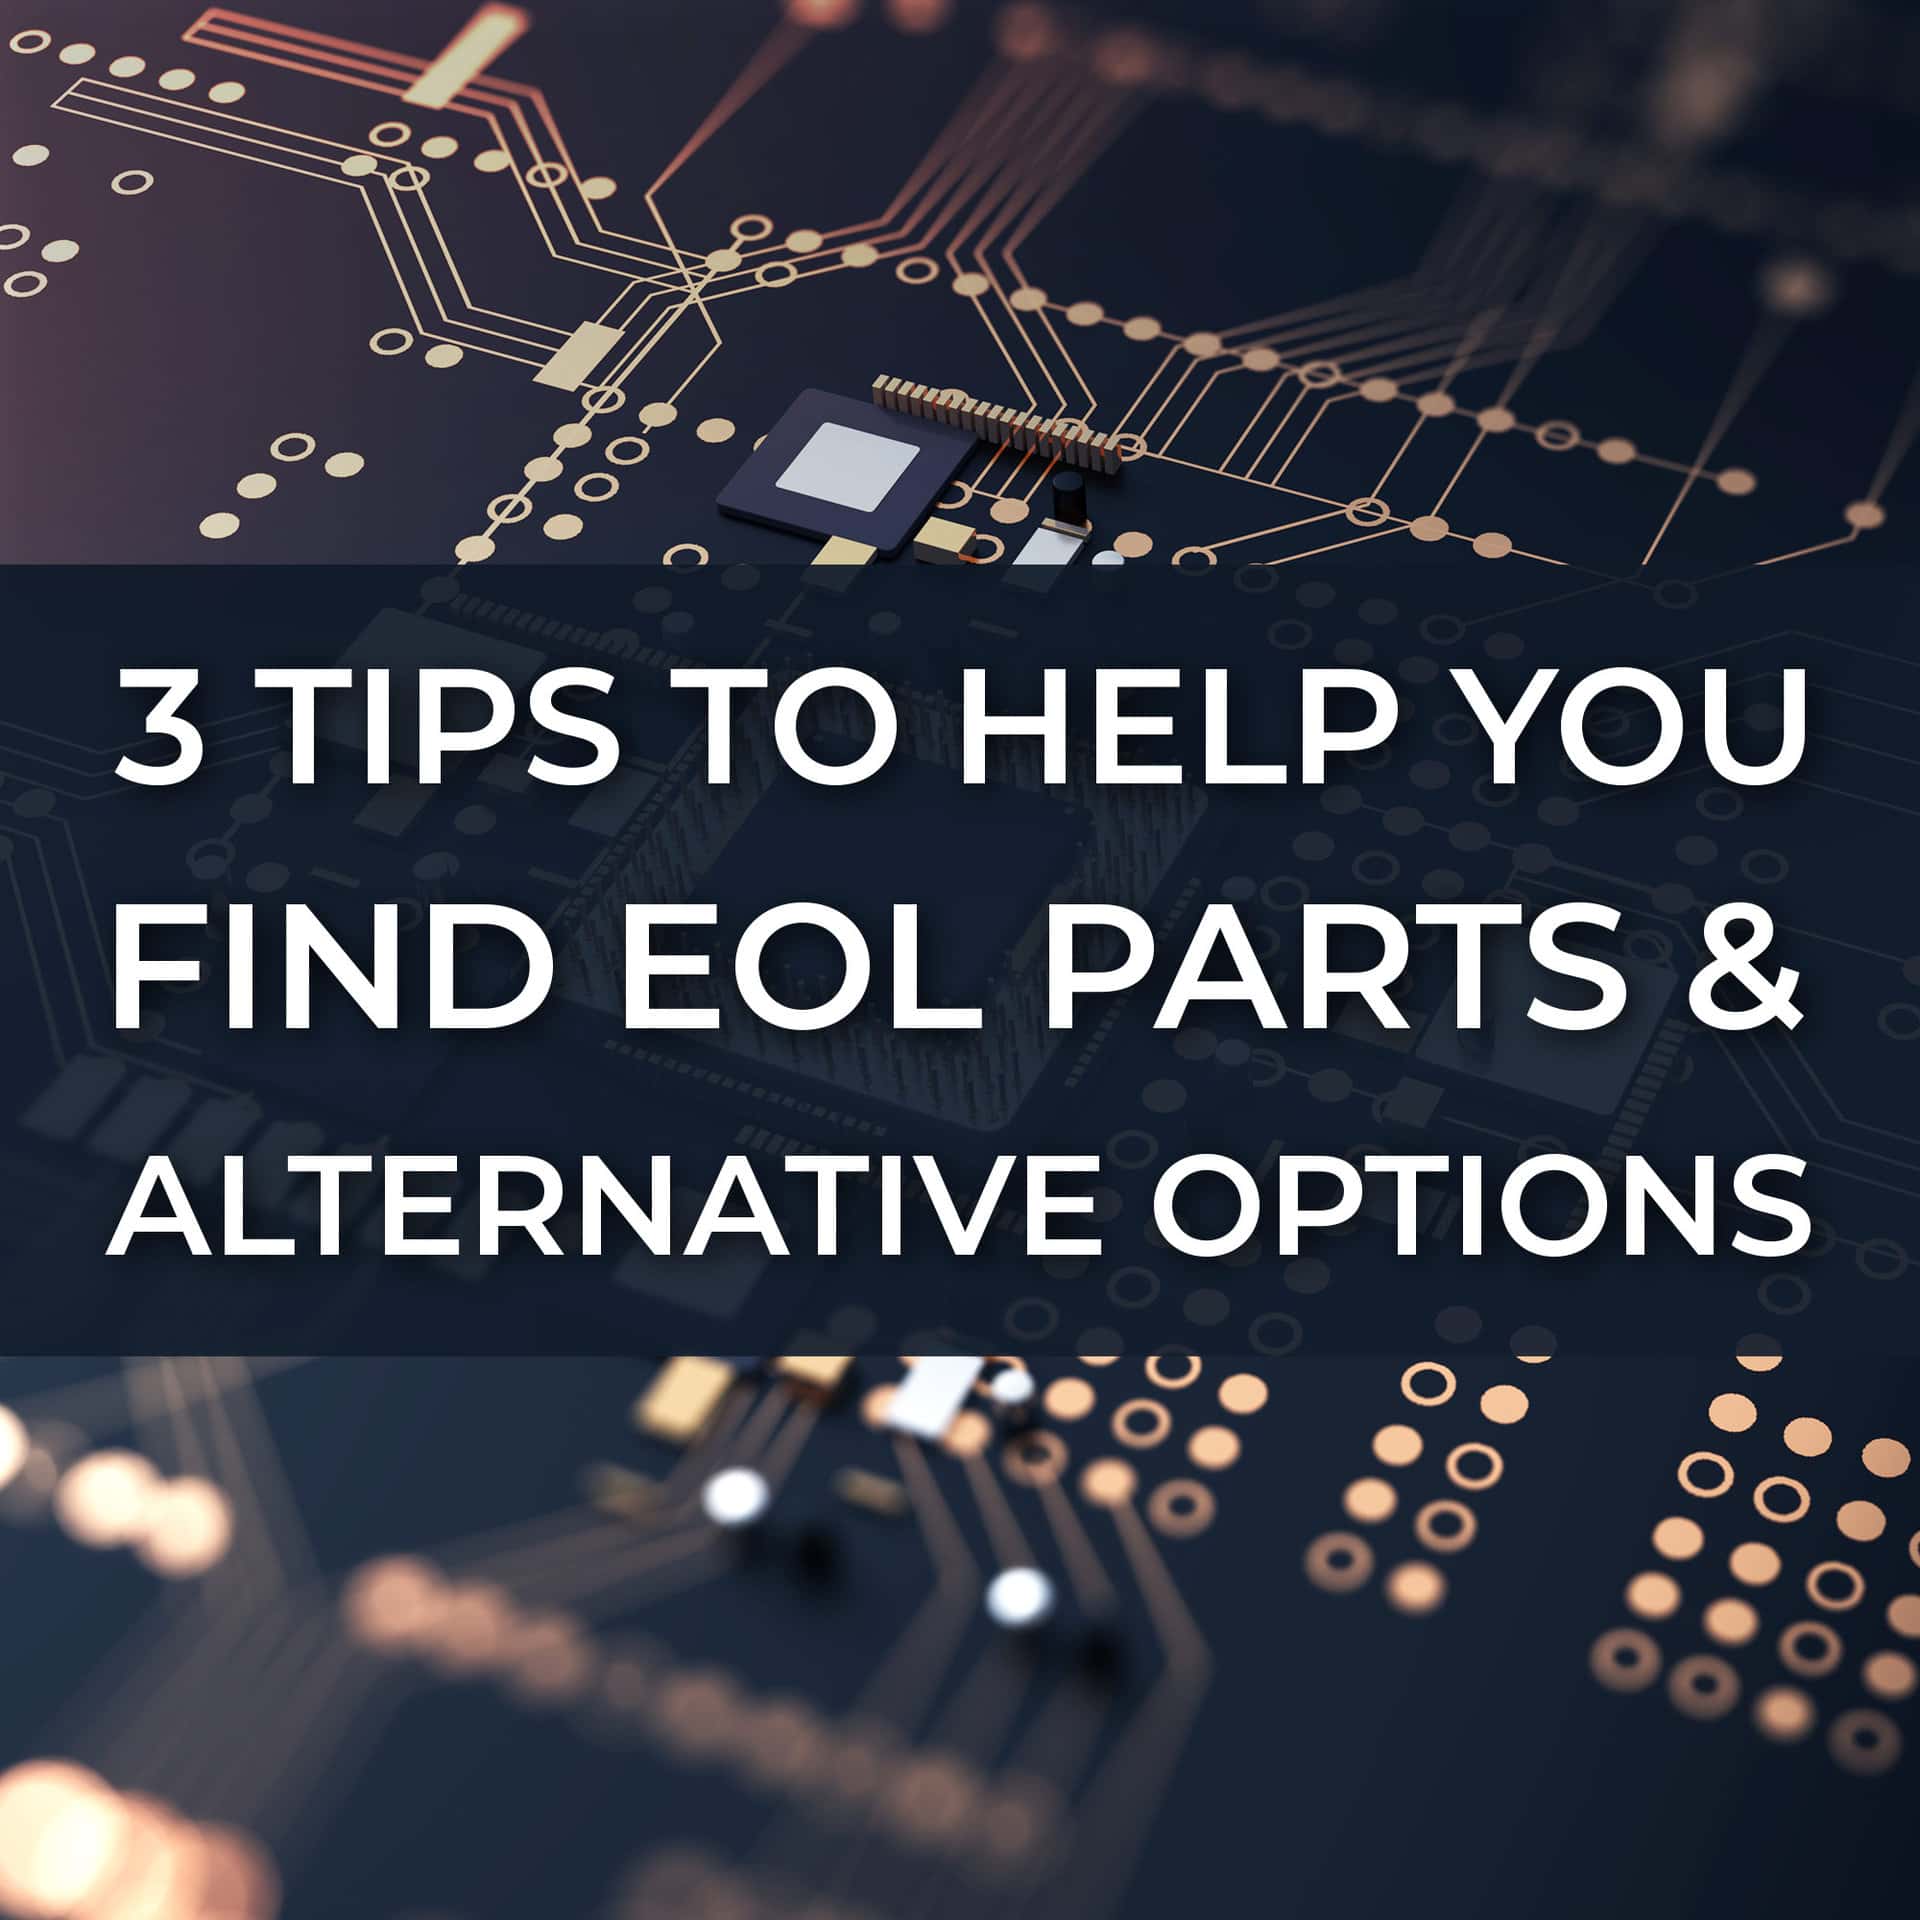 3 Tips to Help You Find EOL Parts & Alternative Options.